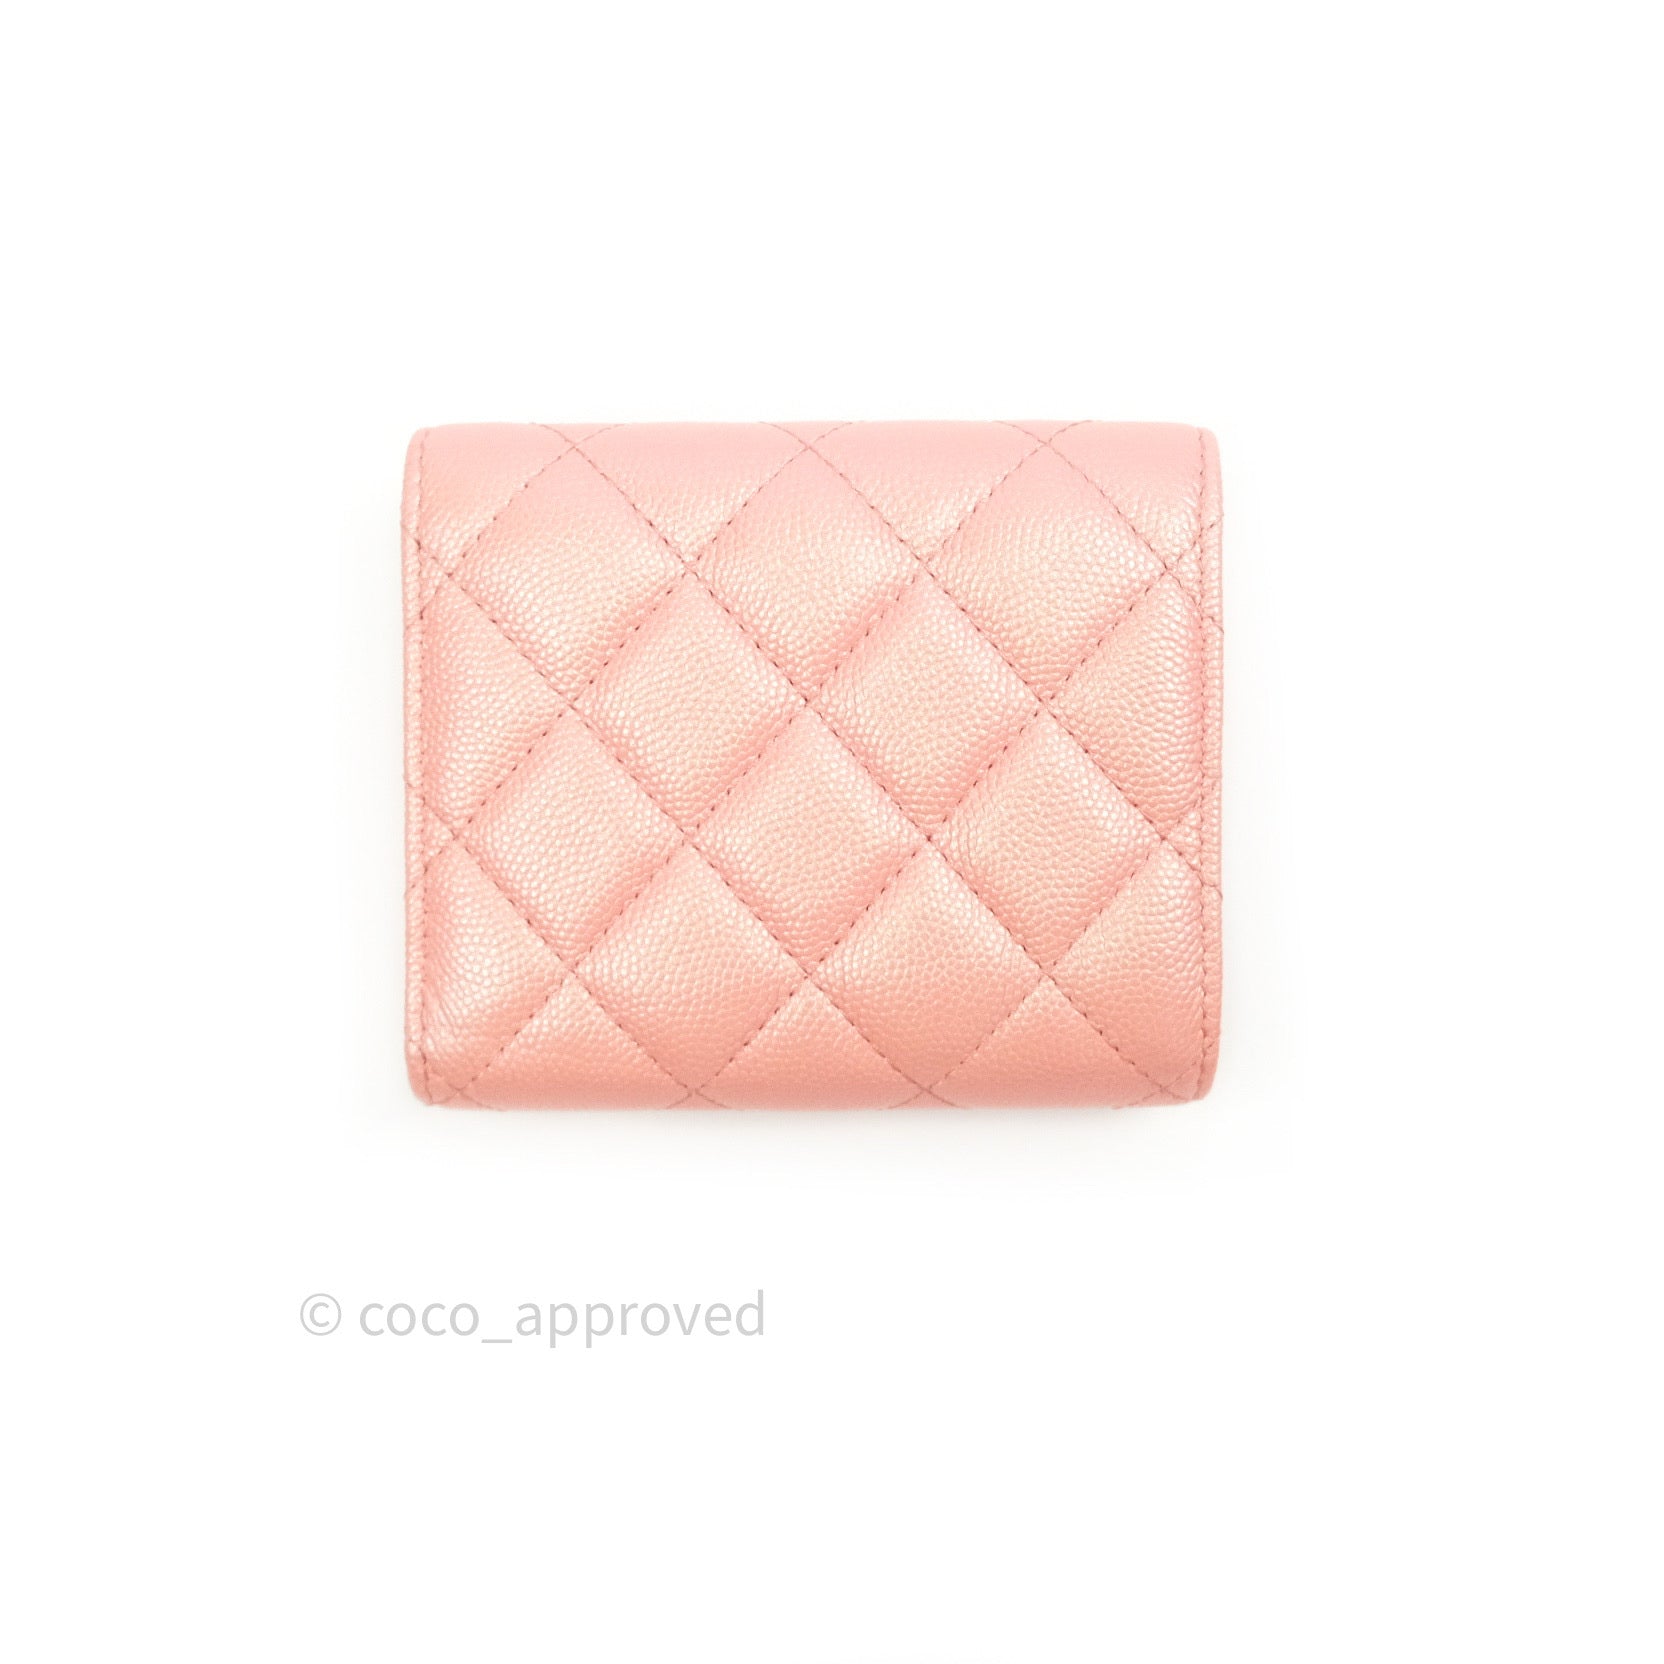 Chanel Compact Wallet, Caviar, Light pink LGHW - Laulay Luxury